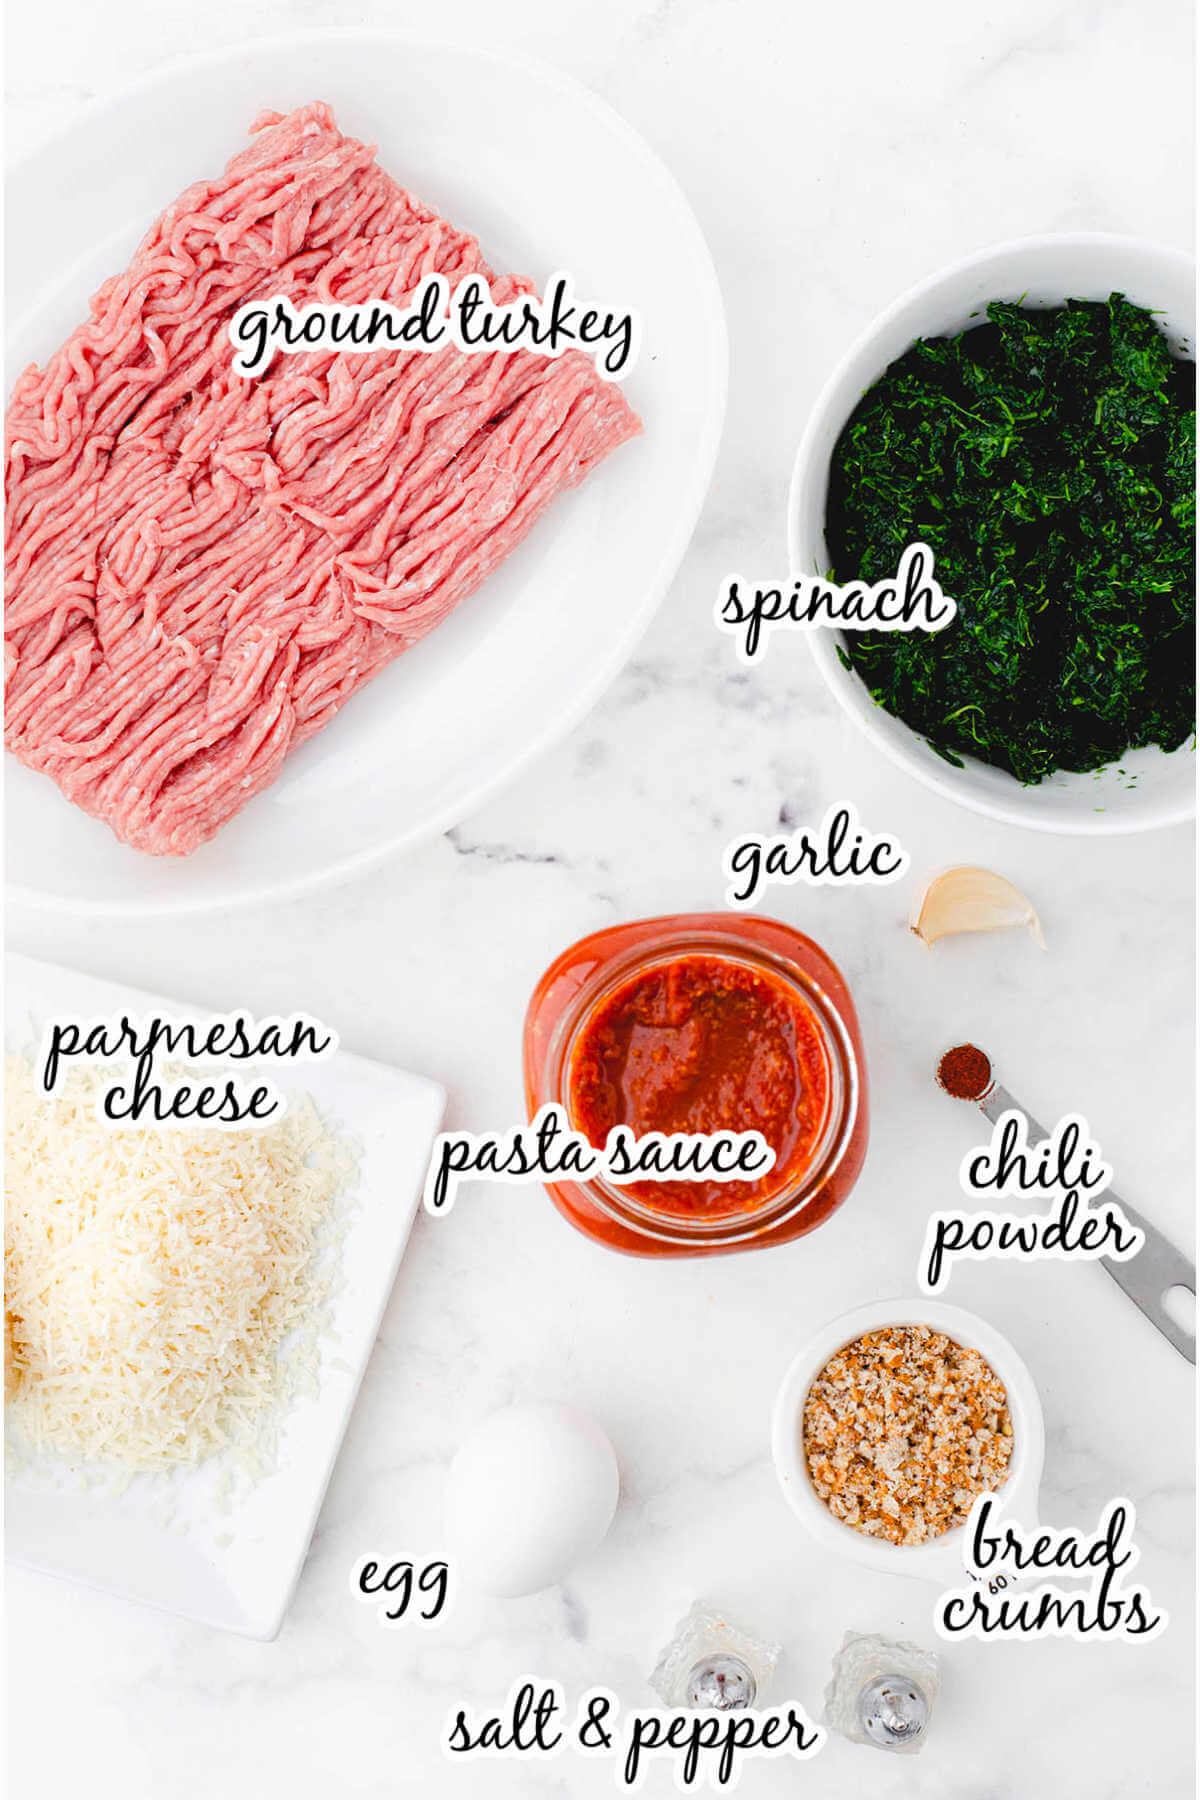 Ingredients to make meatball recipes, with print overlay.